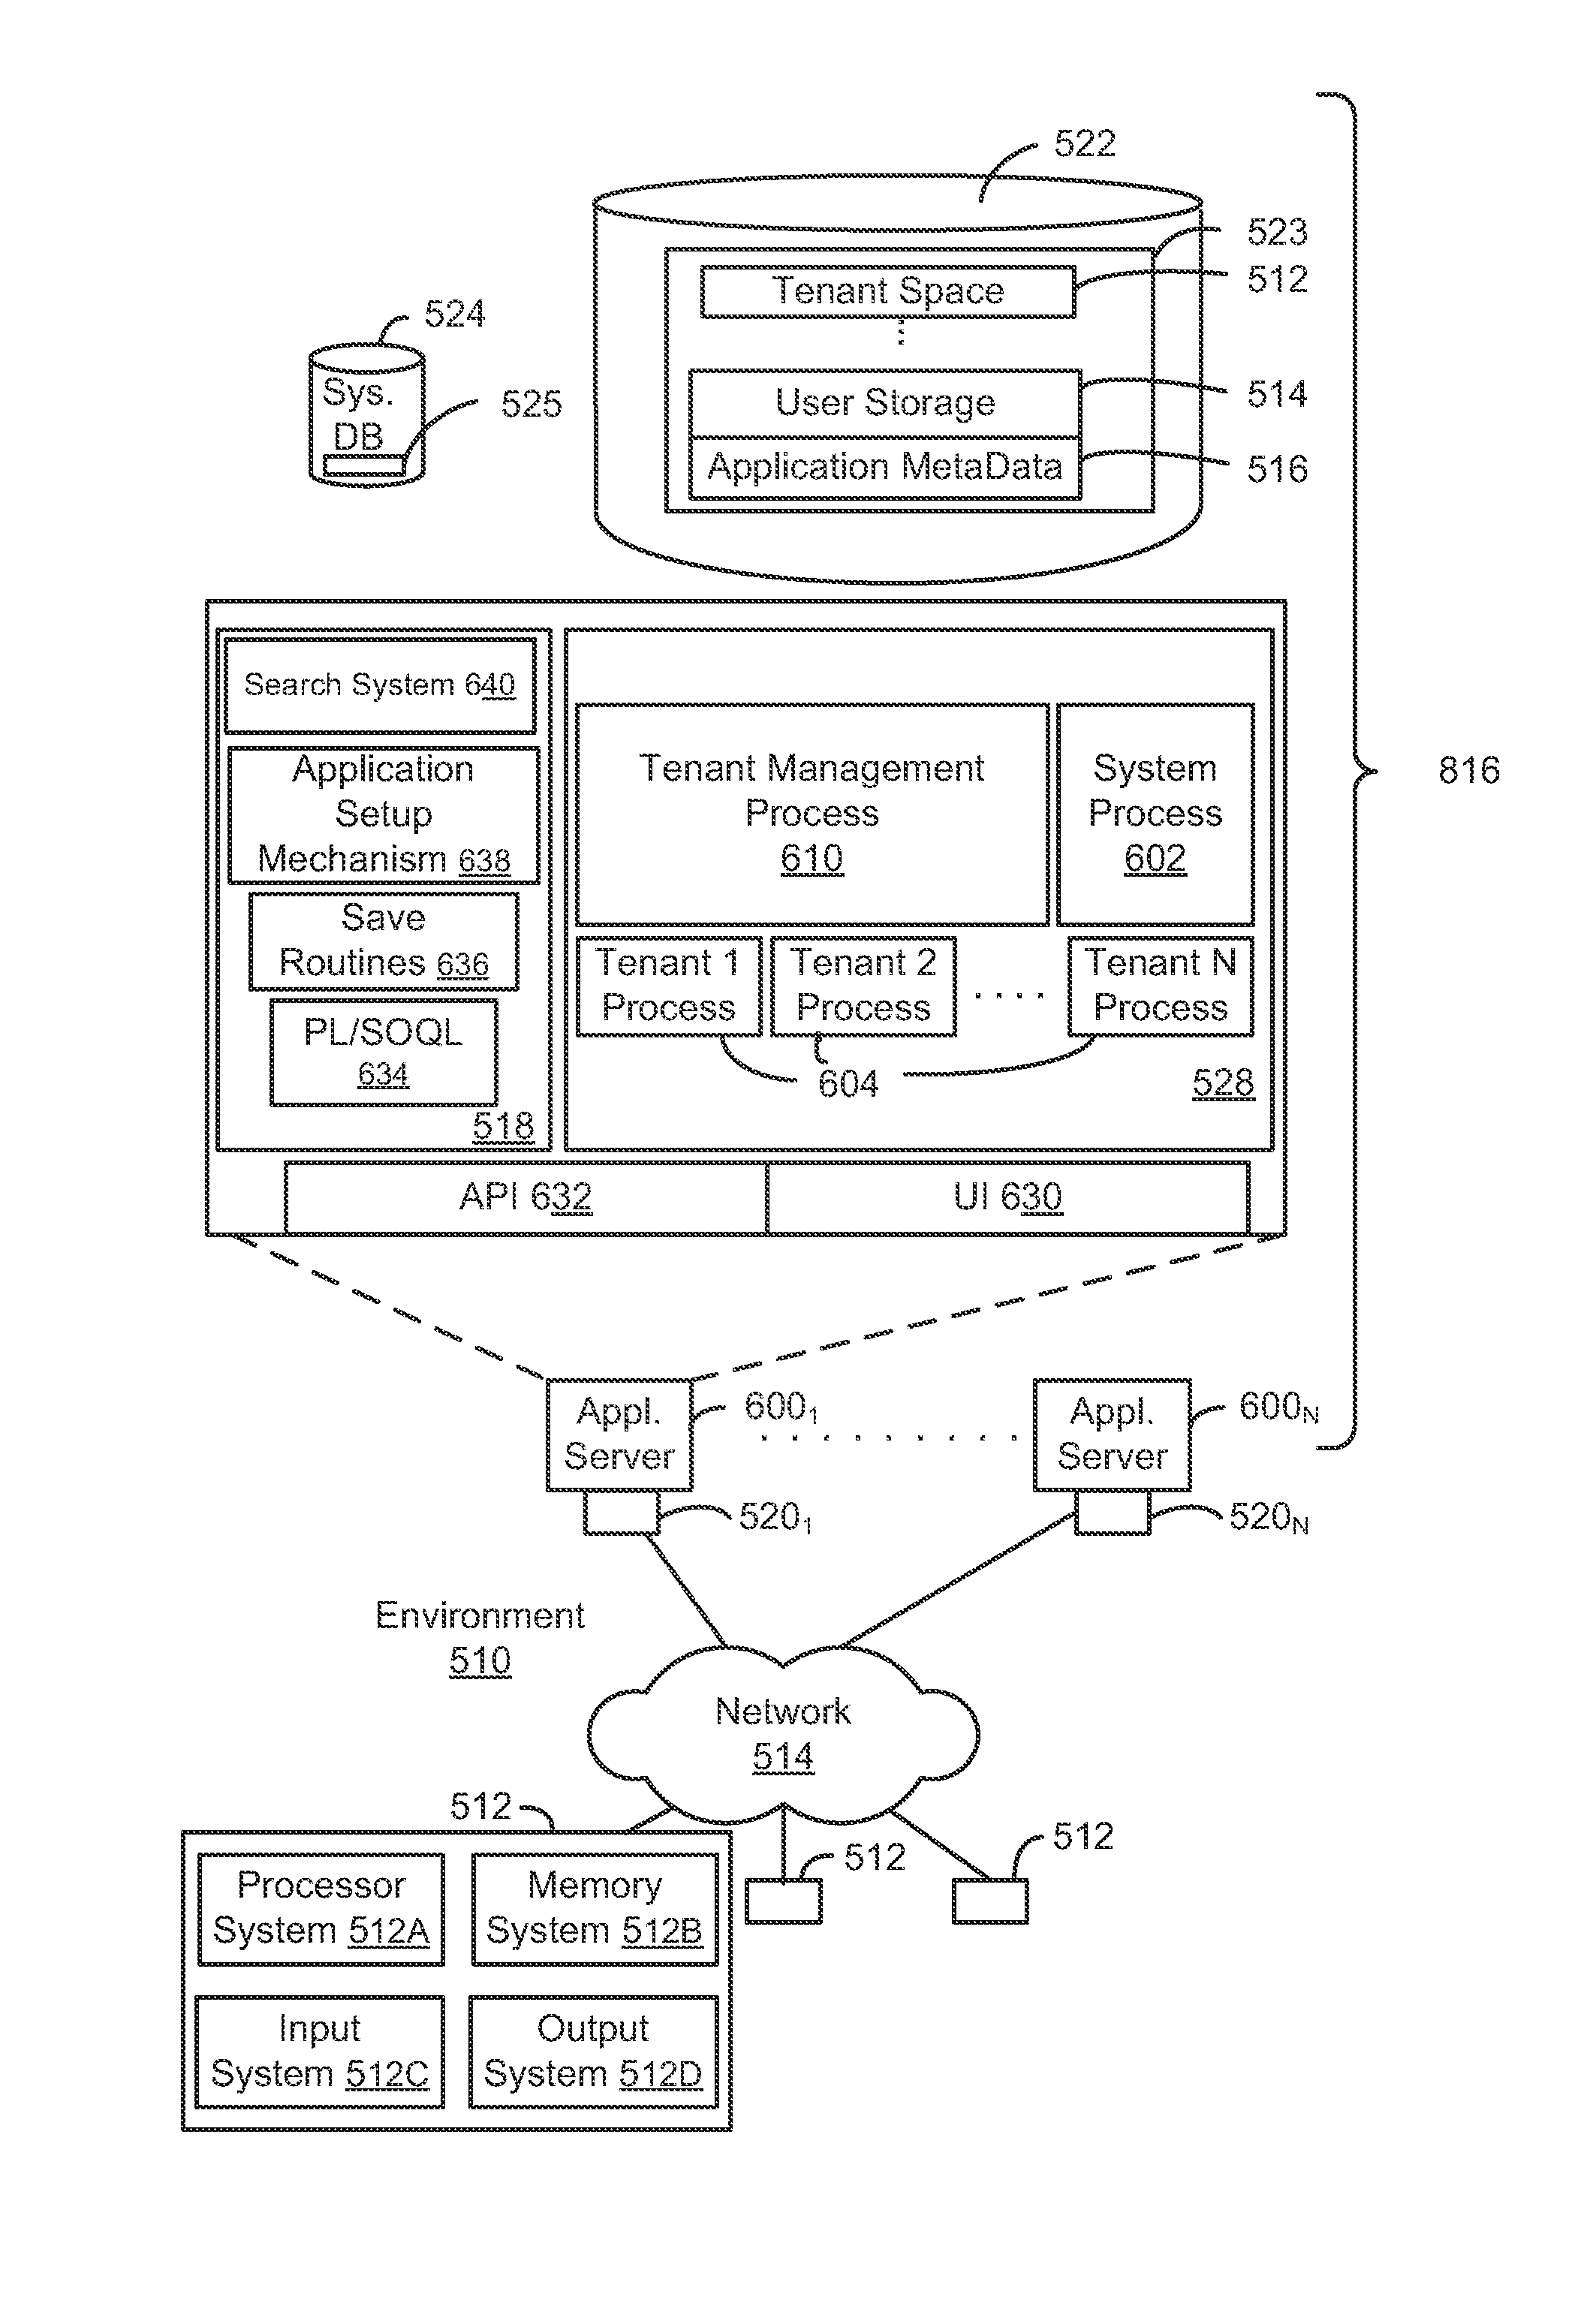 System, method and computer program product for monitoring data activity utilizing a shared data store